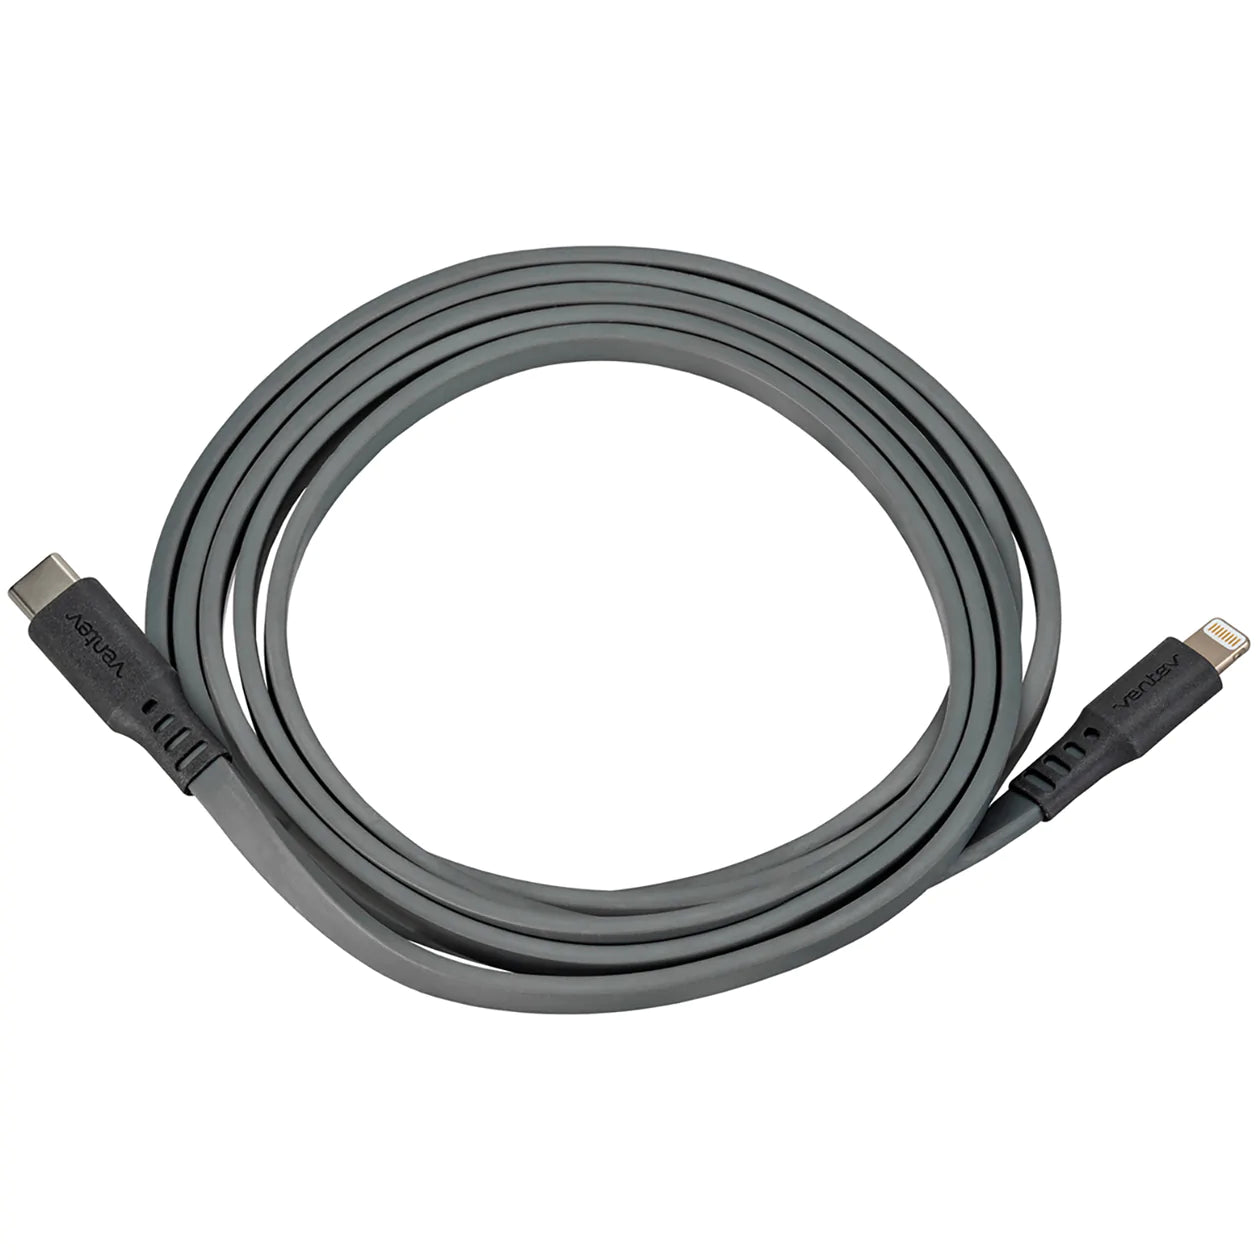 CABLE VENTEV PLANO CHARGESYNC USB-C A LIGHTNING 1 MT - GRIS